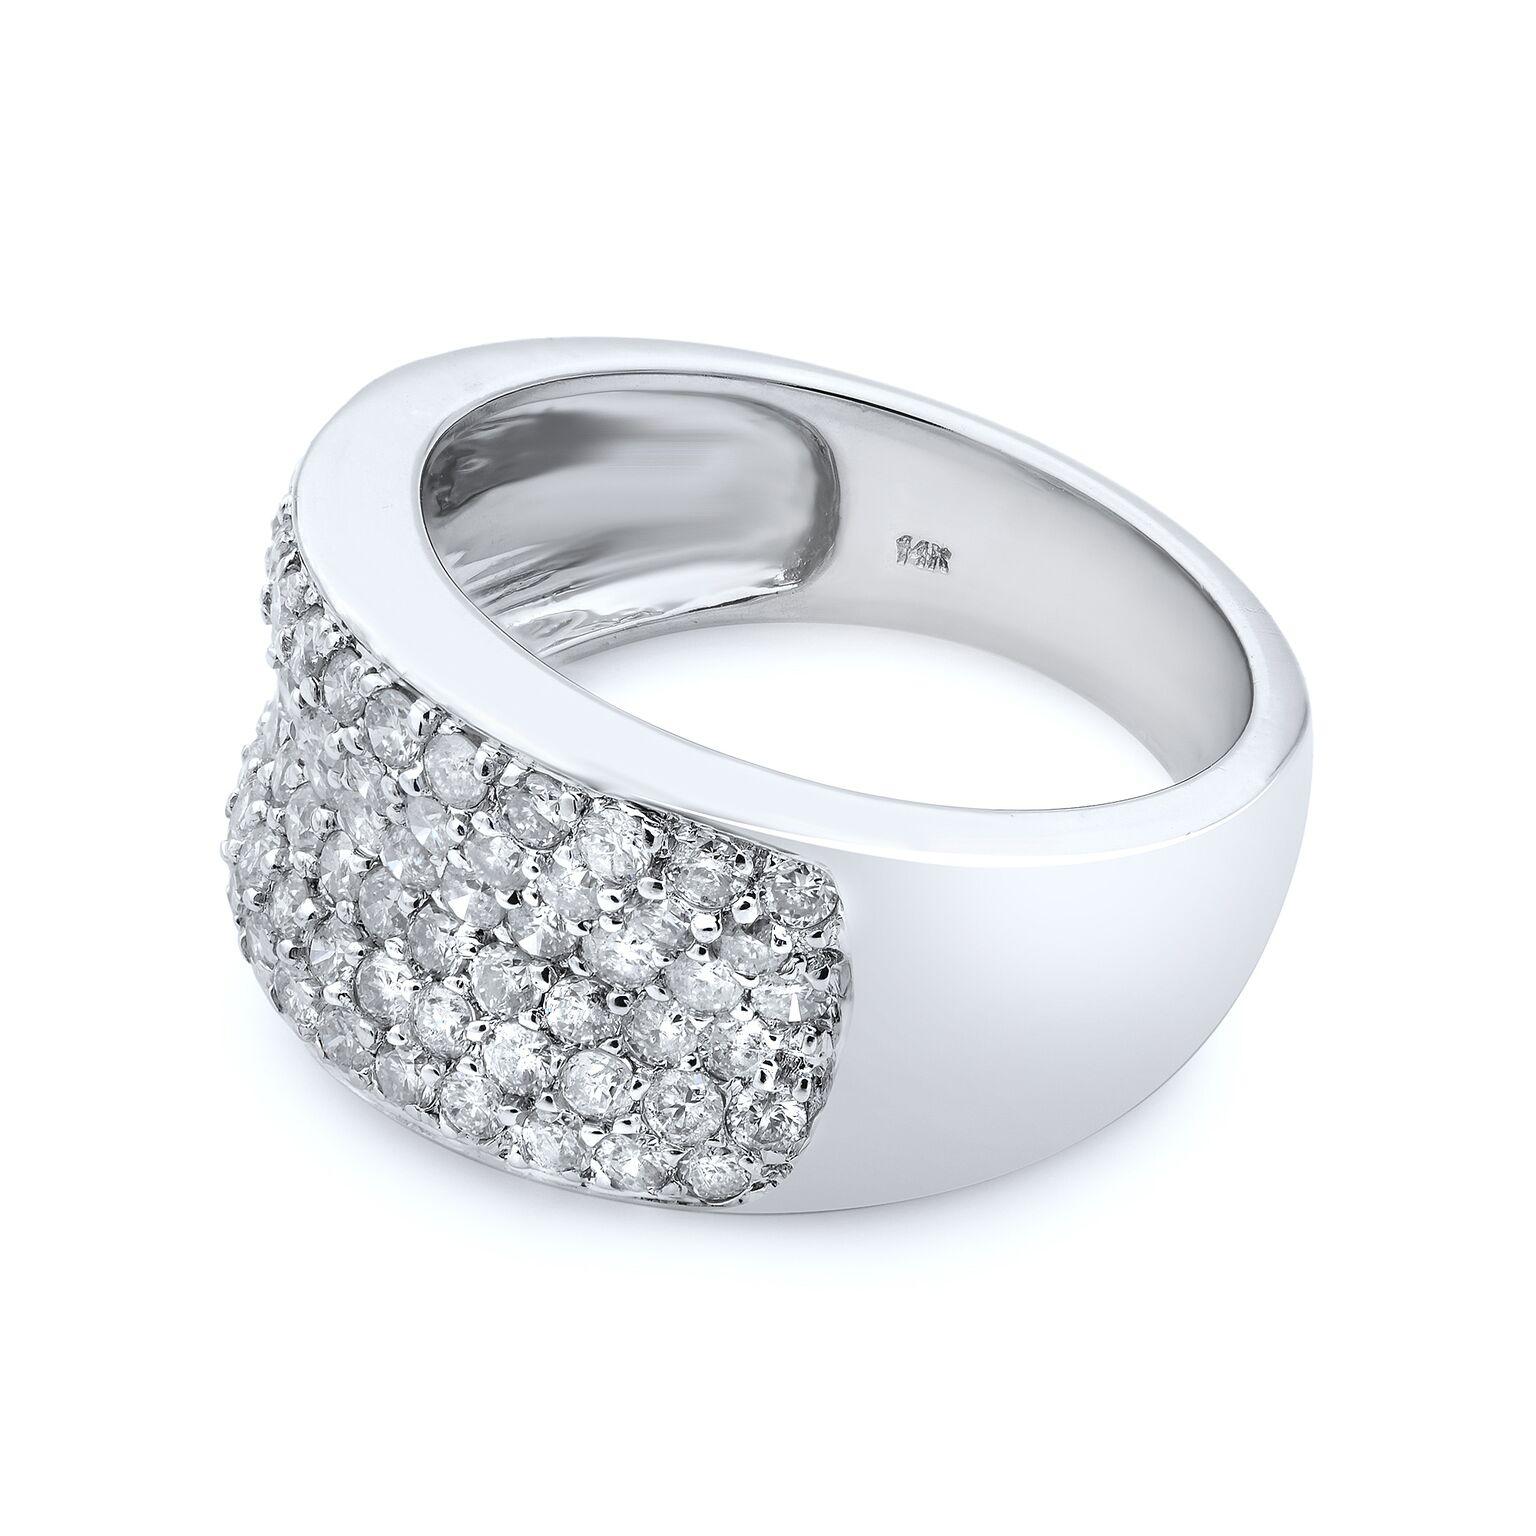 This 14k white gold anniversary band features a stunning array of sparkling round cut diamonds totaling 1.00ct. Width of the band is 10.50 mm. Diamonds are SI1 clarity and I color. Ring size 7. Comes with a presentable gift box.
